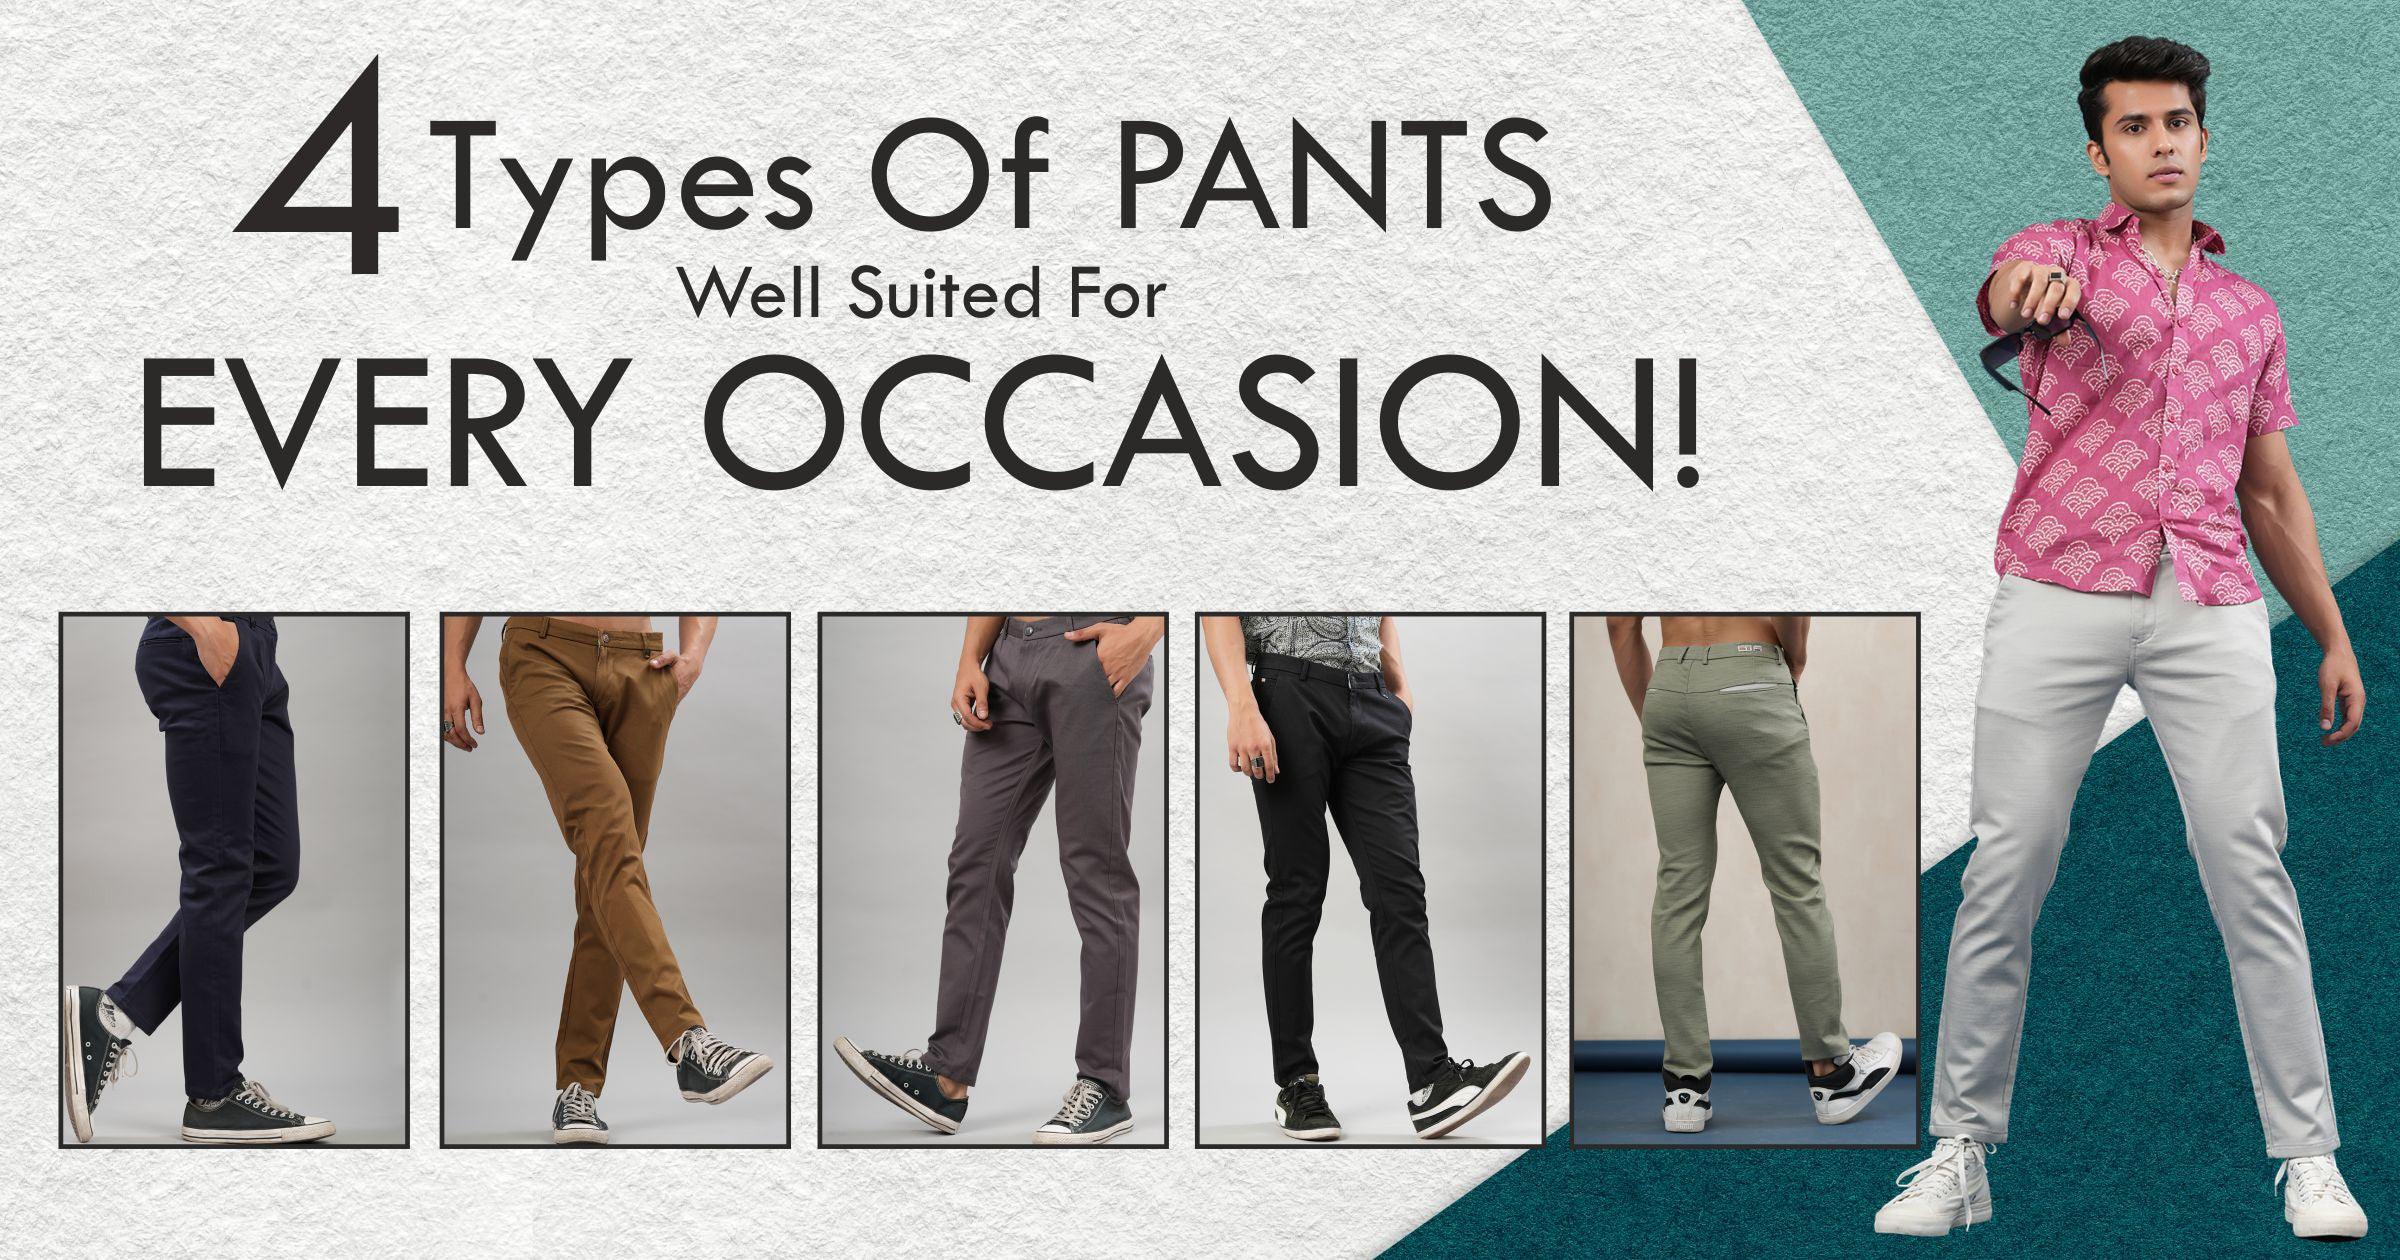 4 Types Of PANTS Well Suited For Every Occasion